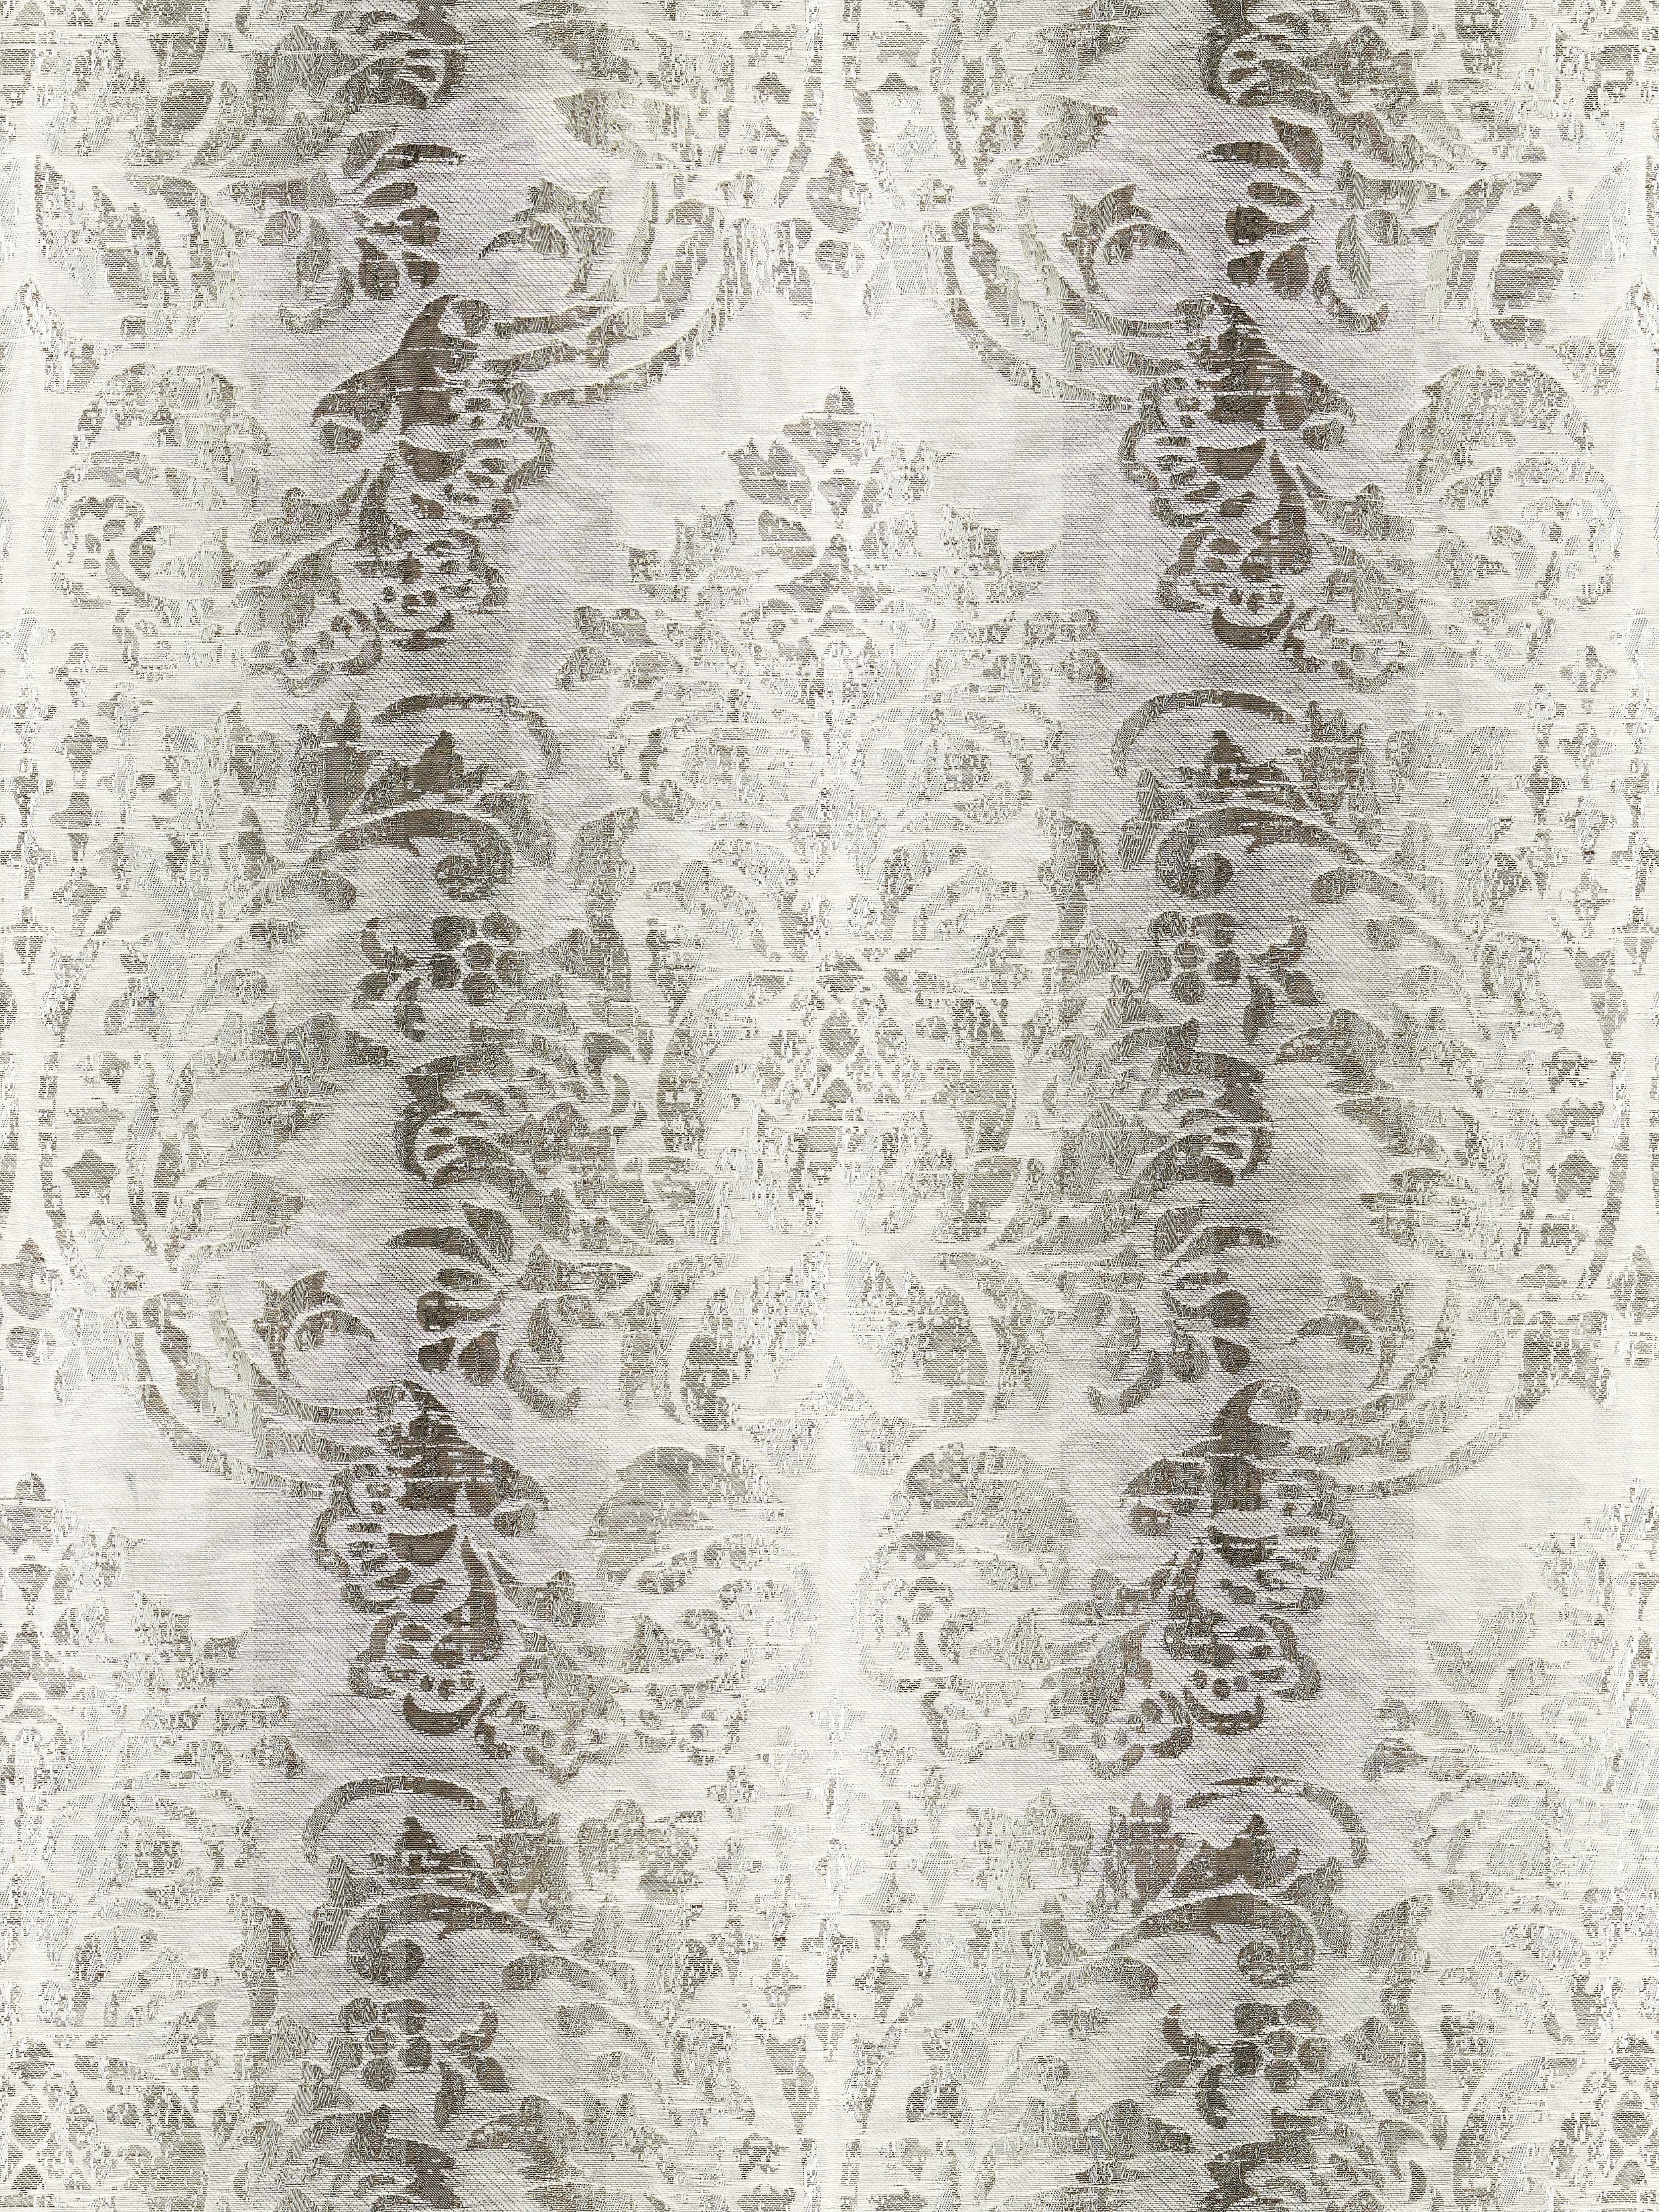 Sorrento Linen Damask fabric in zinc color - pattern number SC 000327093 - by Scalamandre in the Scalamandre Fabrics Book 1 collection